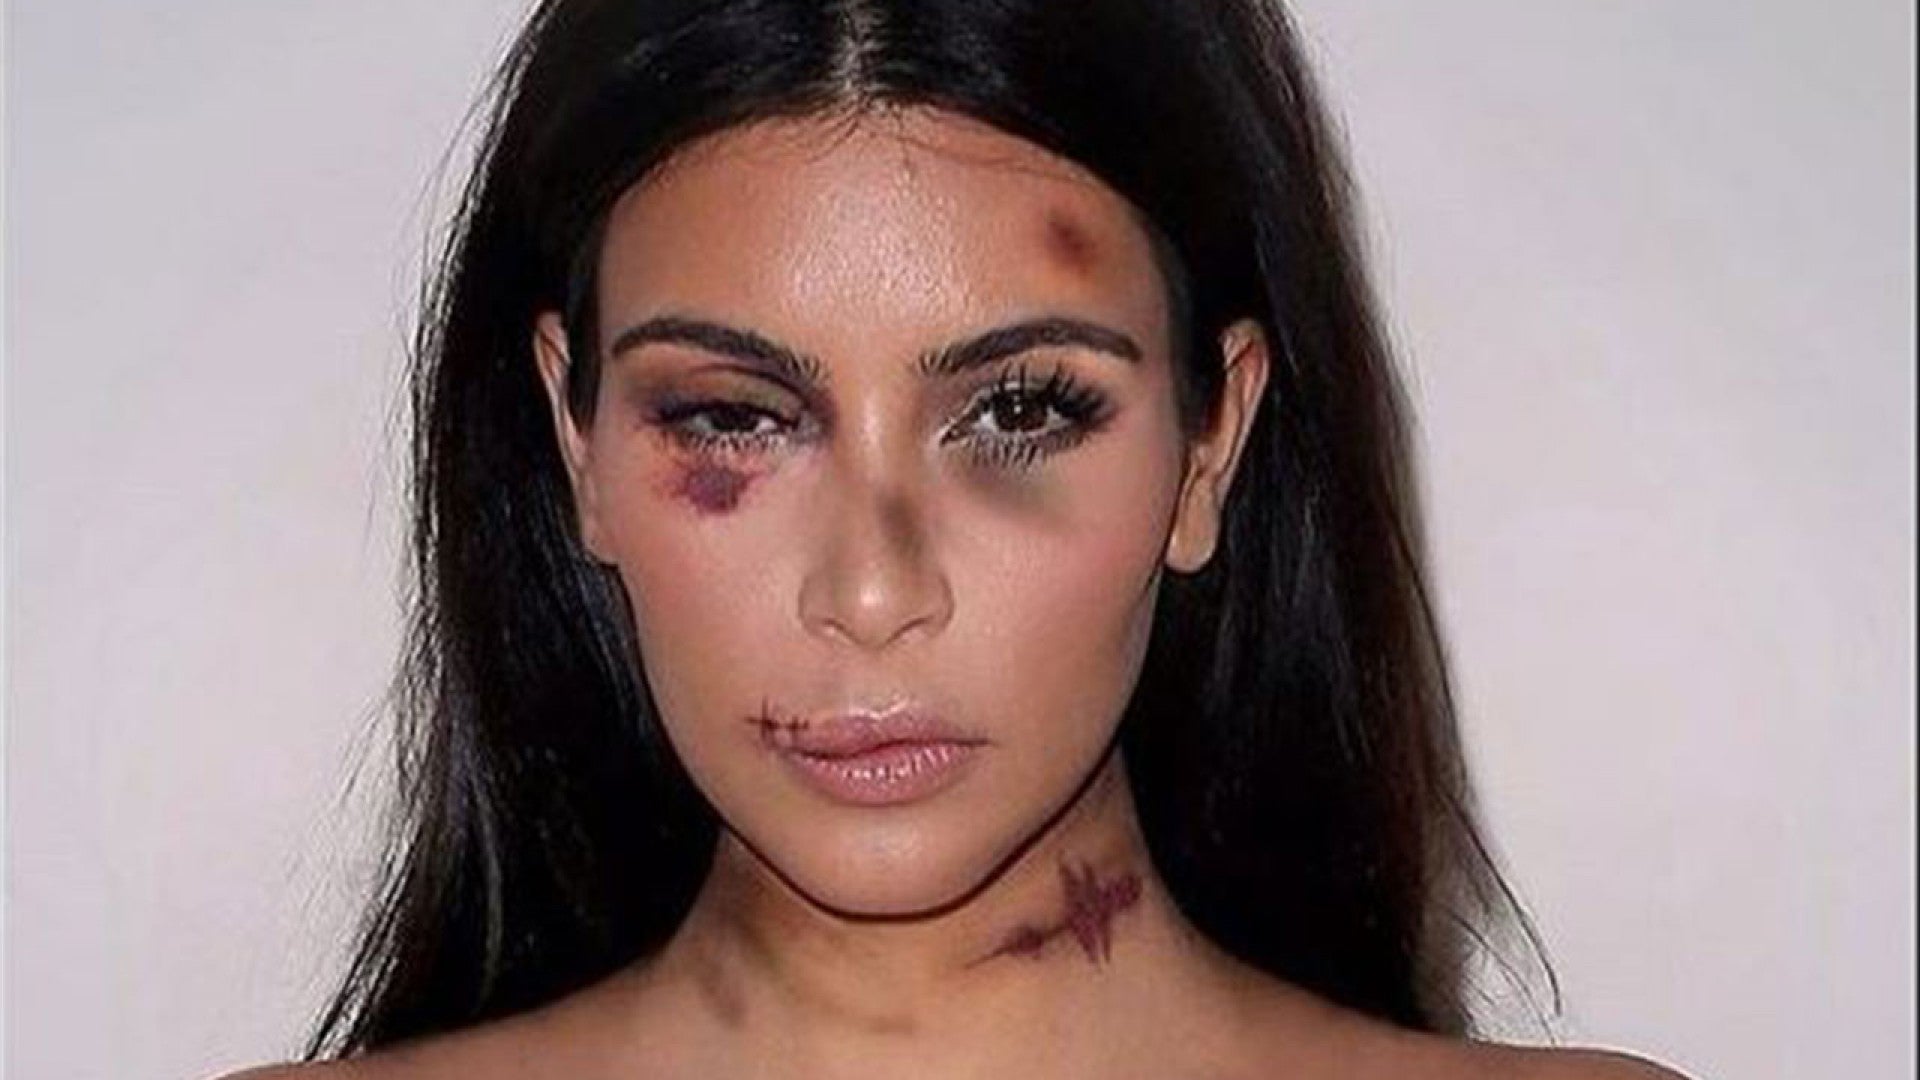 Kim Kardashian and More Female Stars Pictured Battered Bruised in Anti-Violence Campaign | Entertainment Tonight